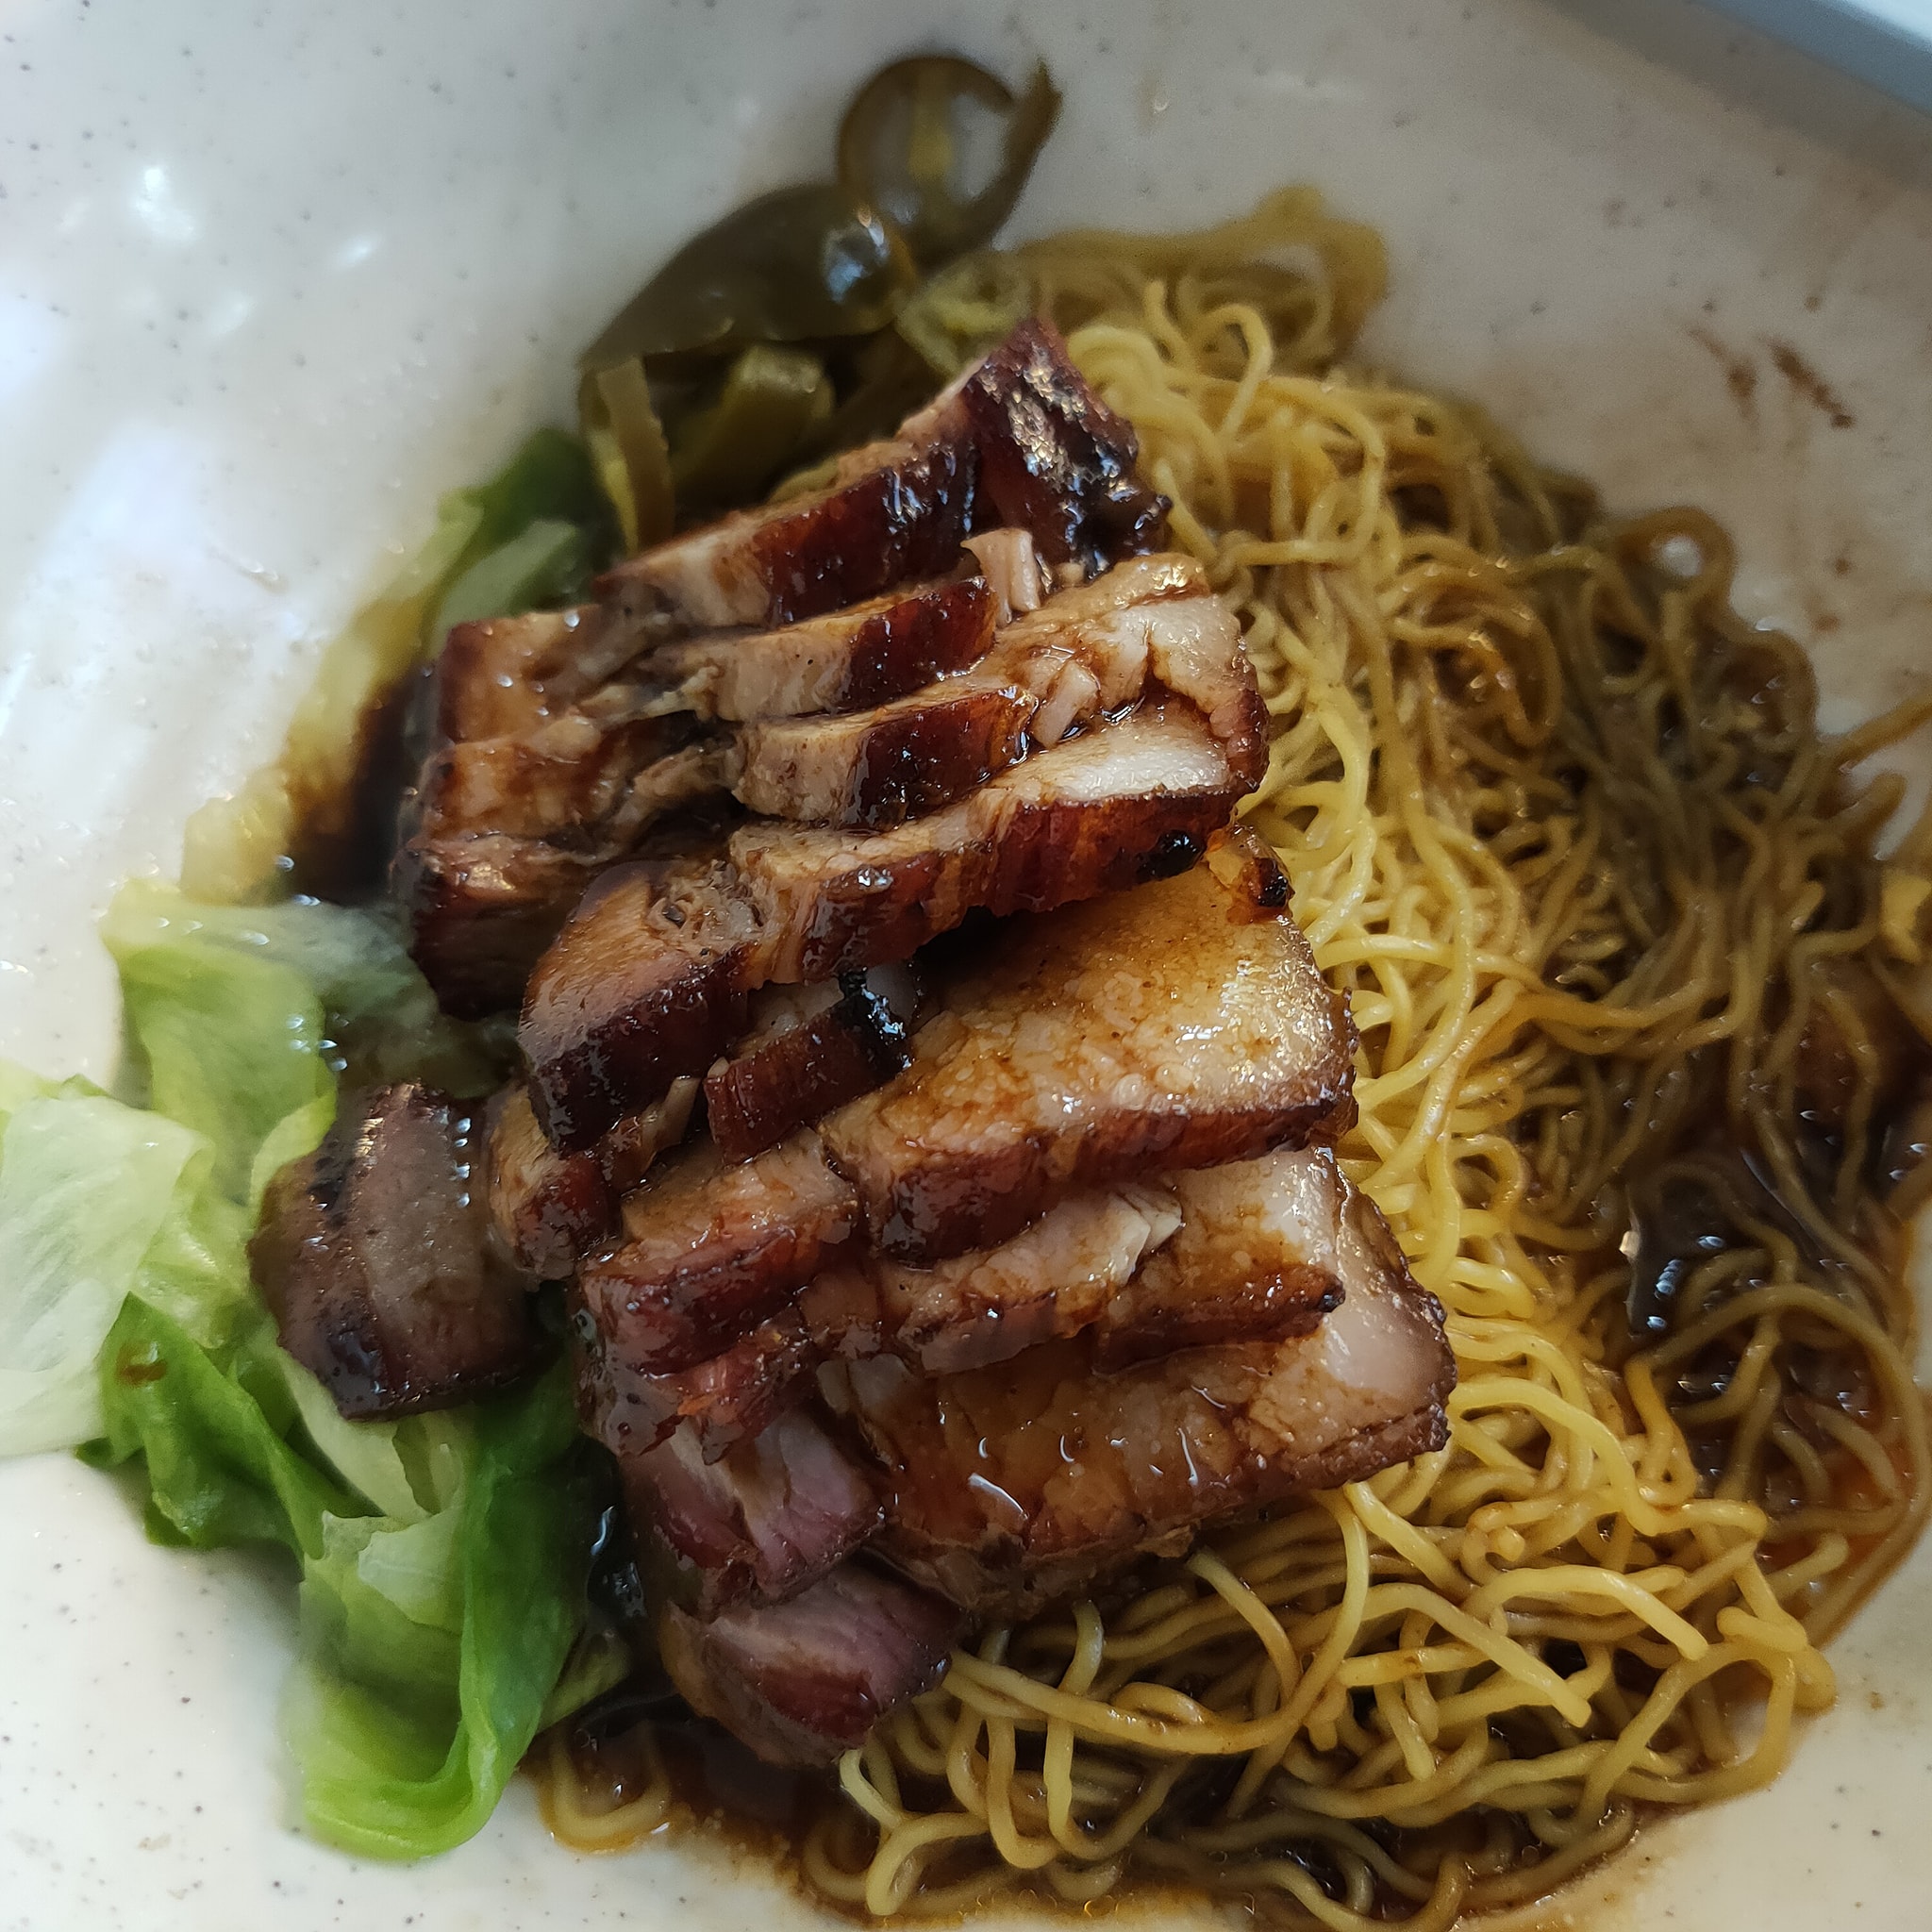 S'pore hawker with stalls in Tampines, Ang Mo Kio ...